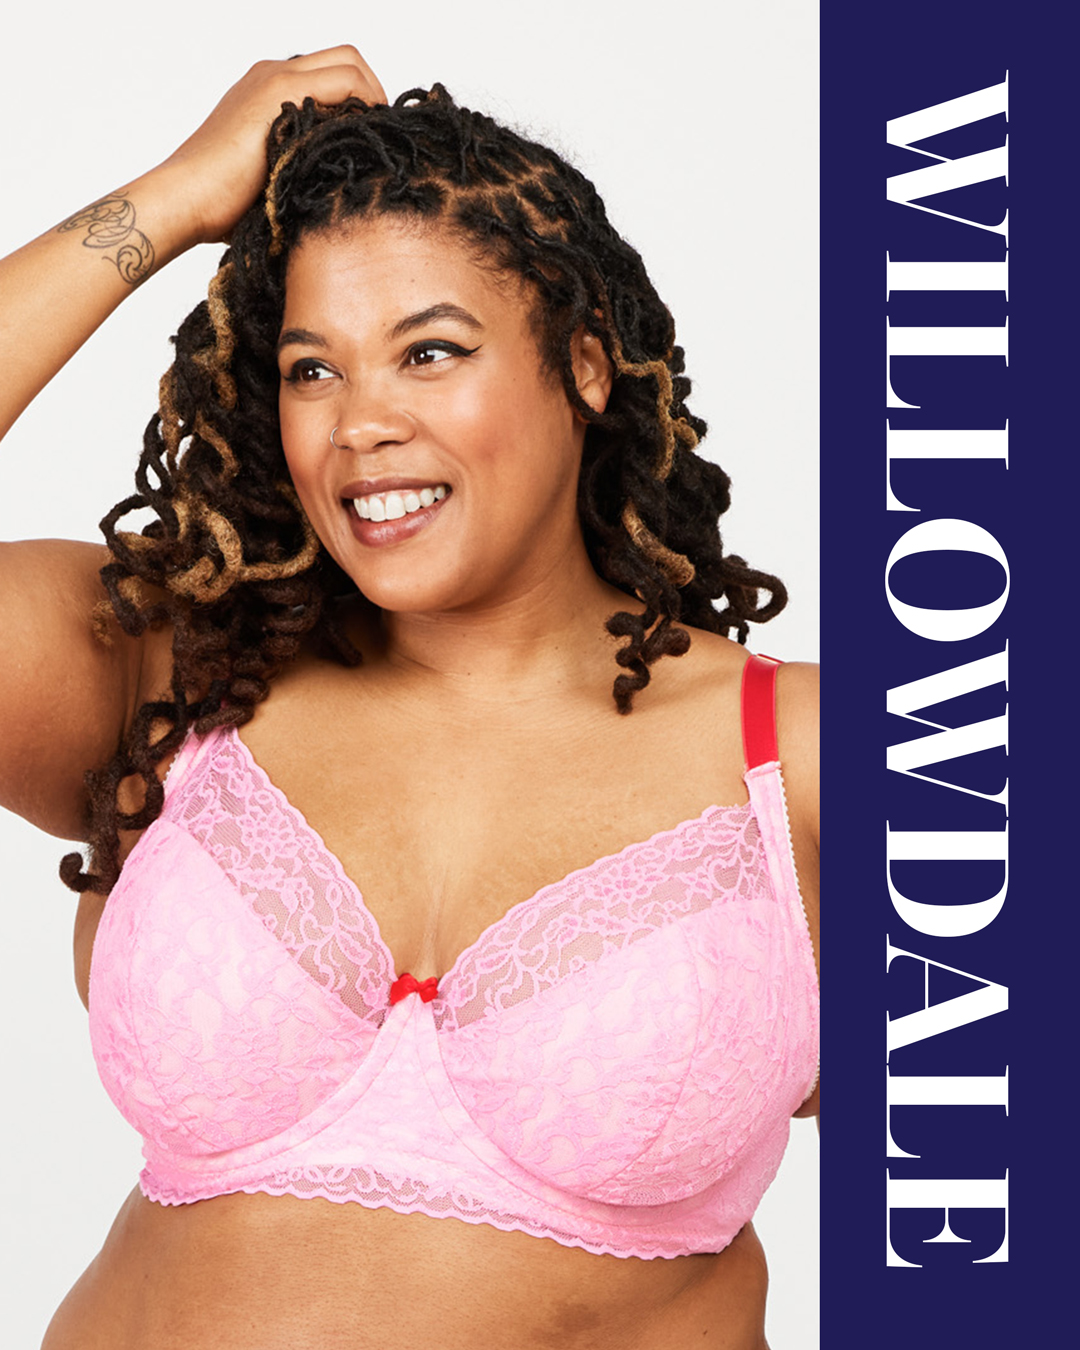 Introducing the Willowdale Bra, an underwire bra sewing pattern